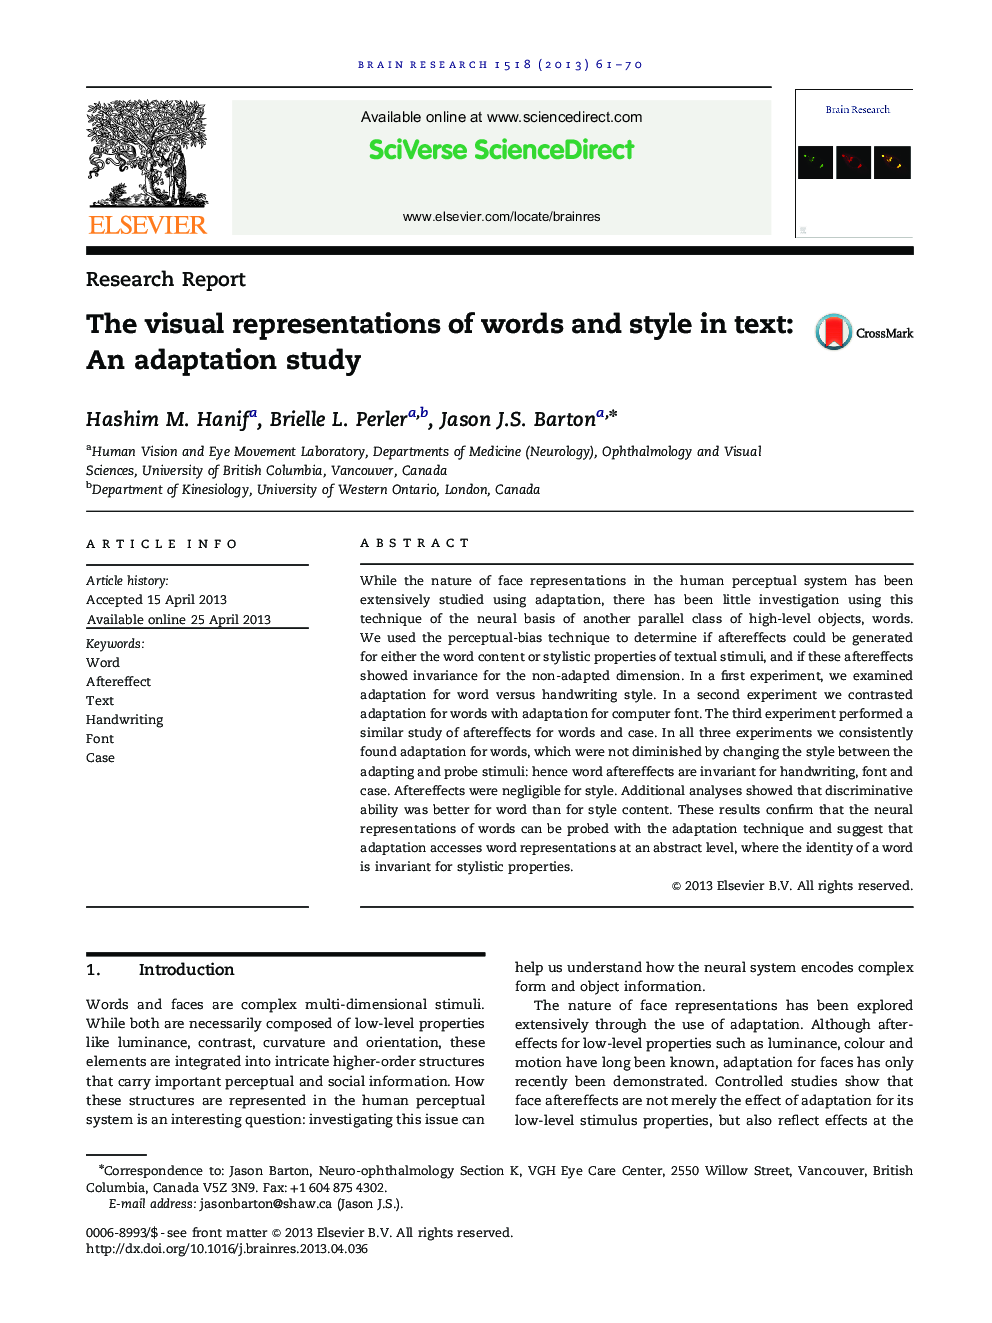 The visual representations of words and style in text: An adaptation study